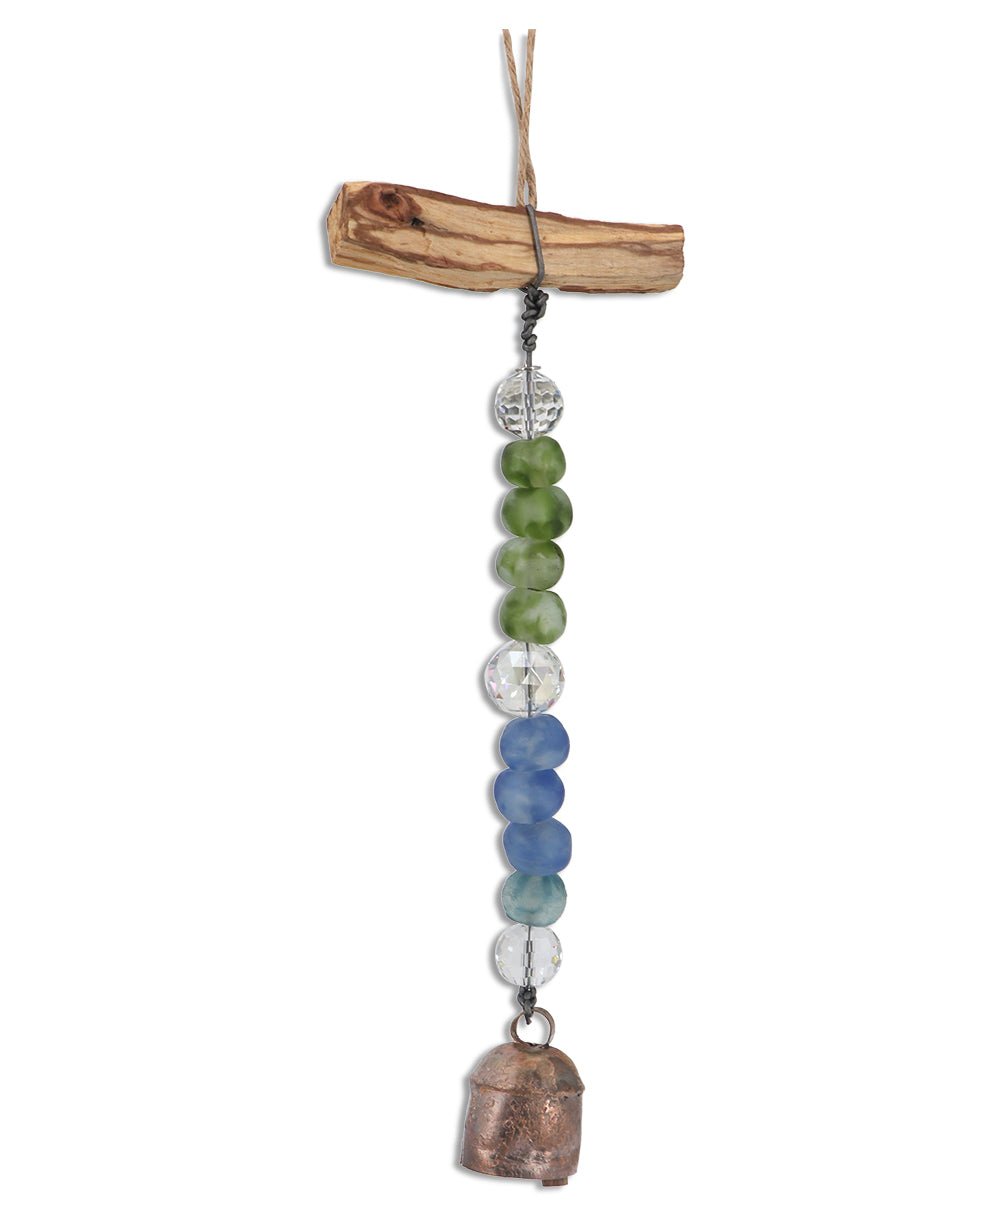 Palo Santo Wood Recycled Glass Beads with Traditional Nana Bell Hanging Chime - Wind Chimes Mixed